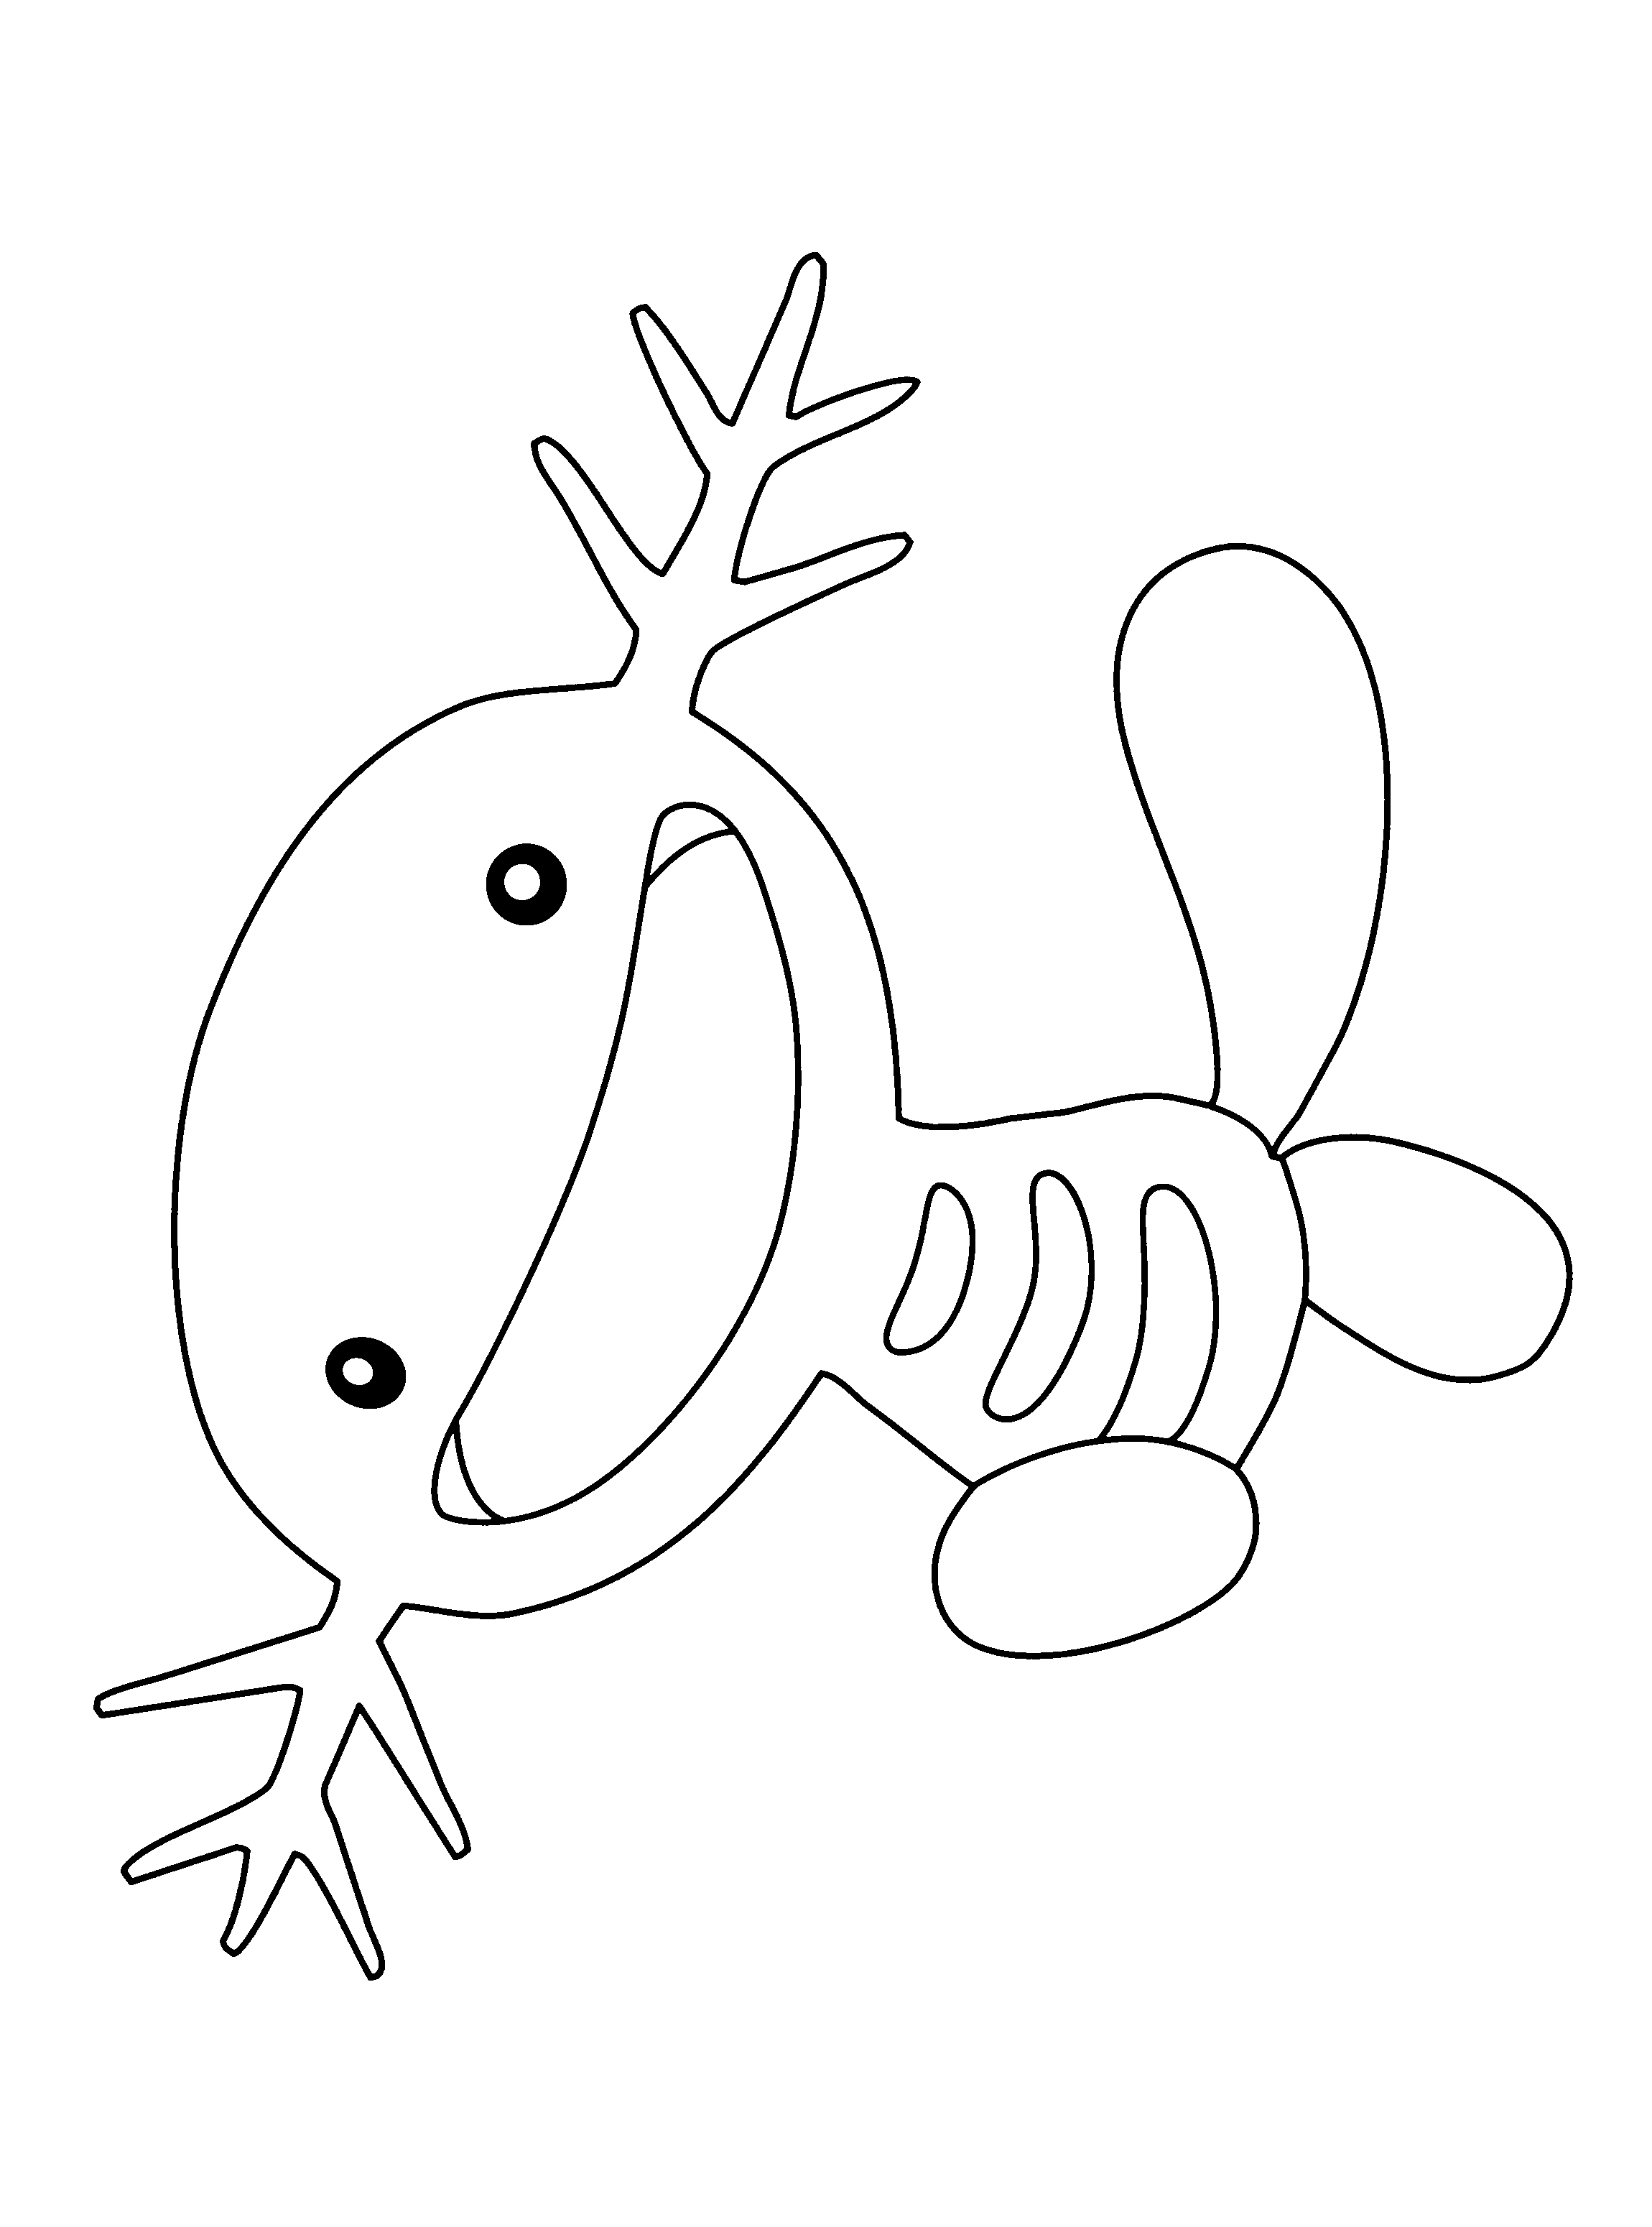 animated-coloring-pages-pokemon-image-0119